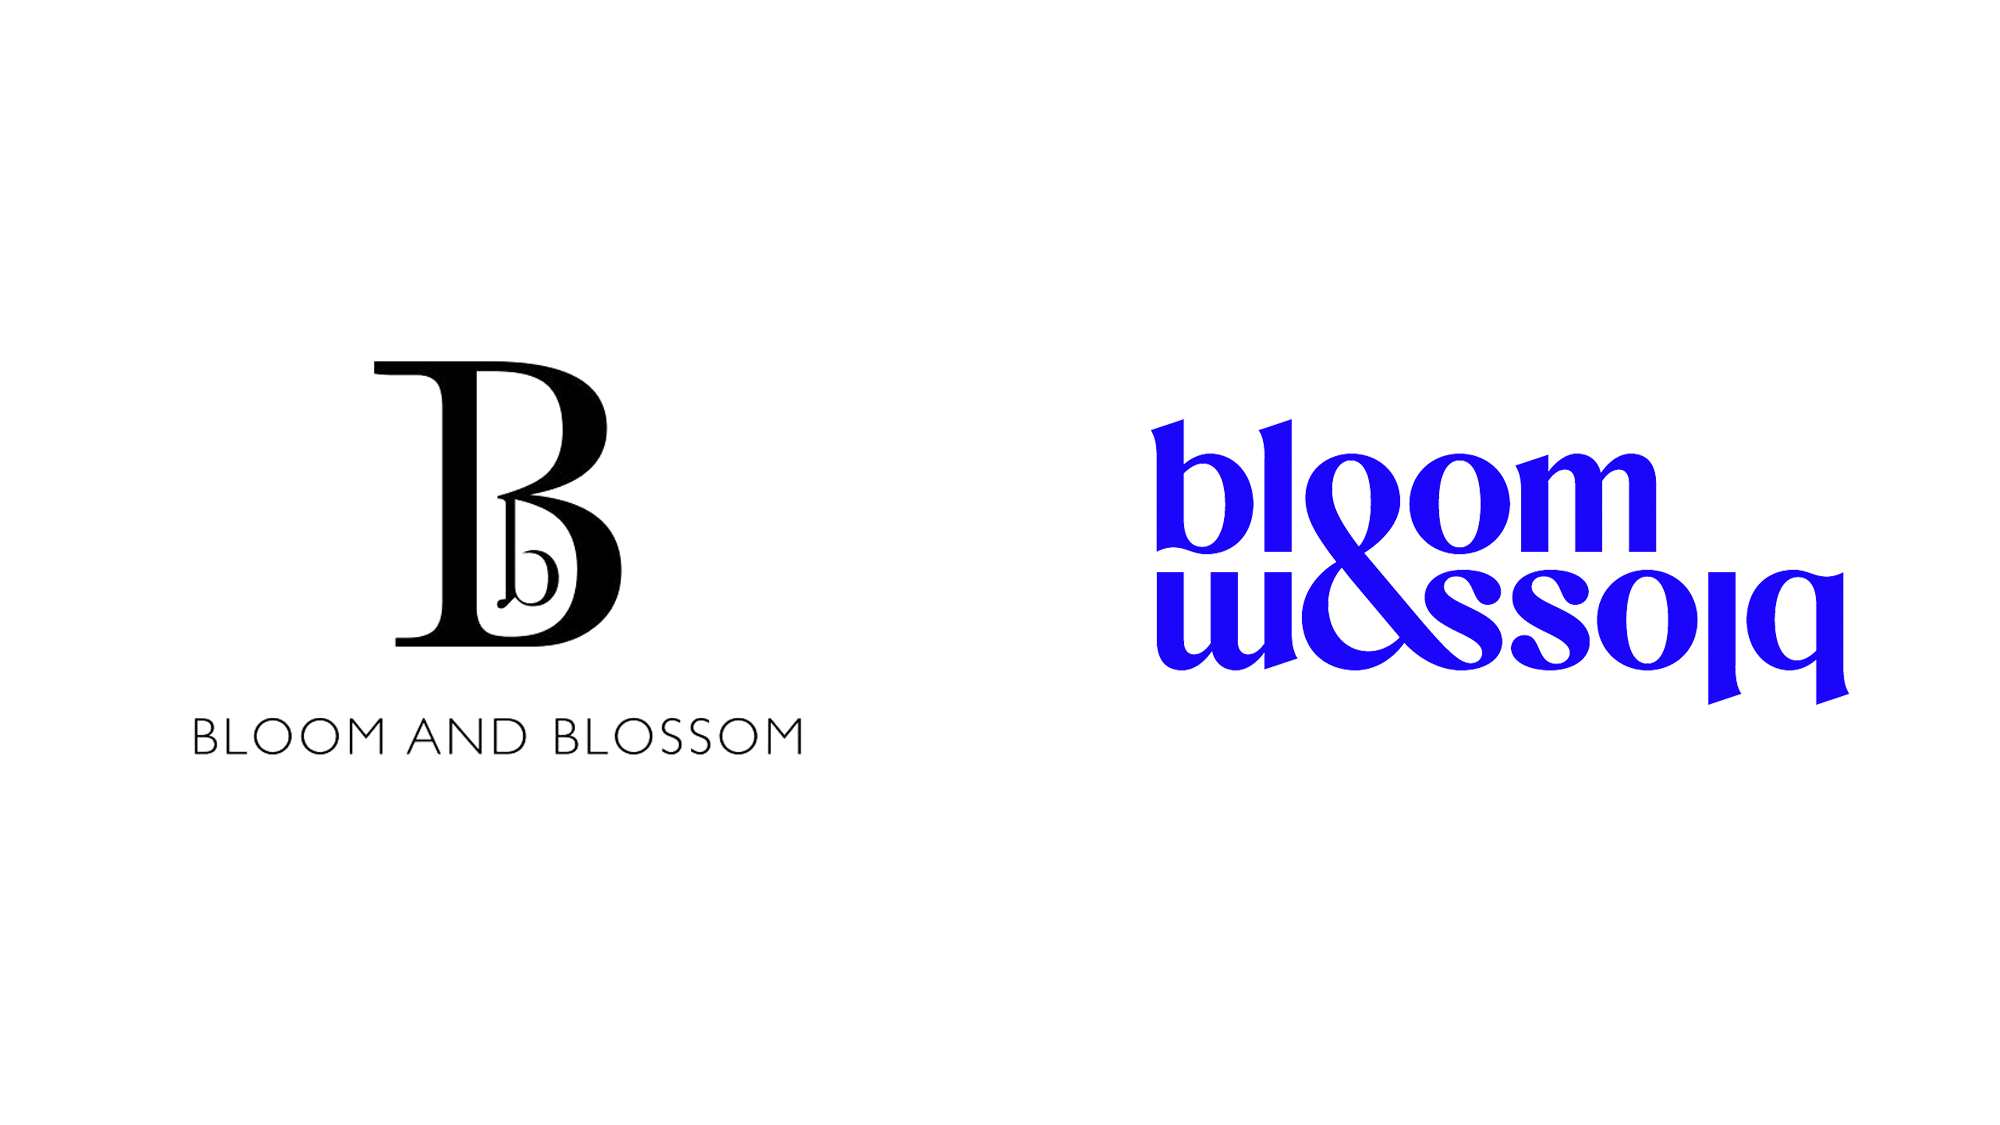 Brand New: New Logo, Identity, and Packaging for Bloom & Blossom by